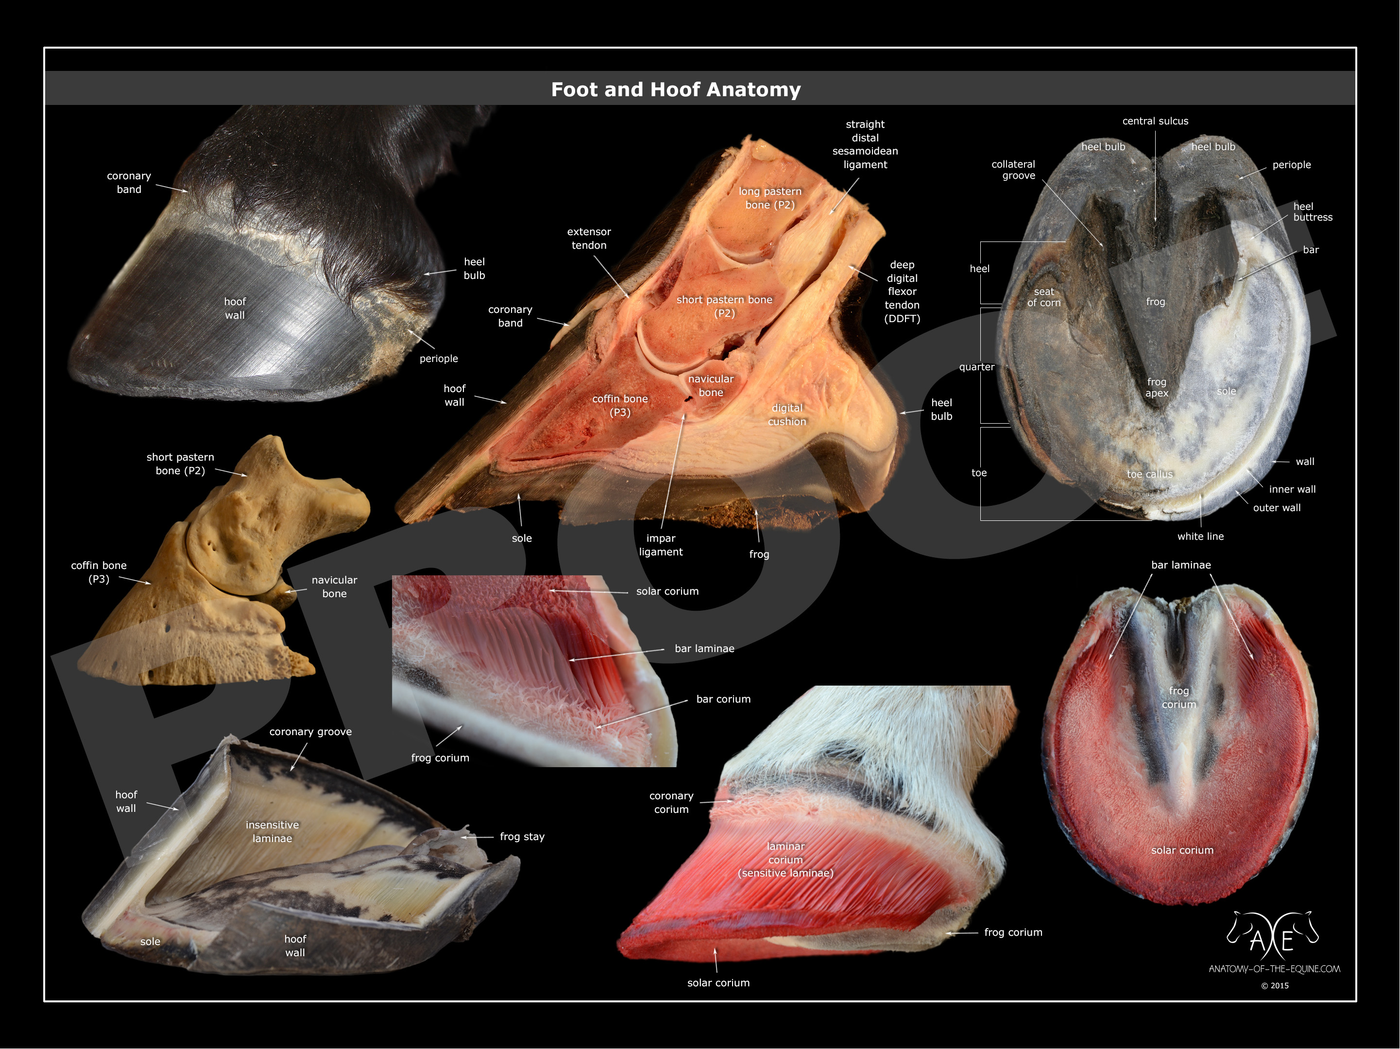 Foot and Hoof Anatomy Poster 61x45 cm